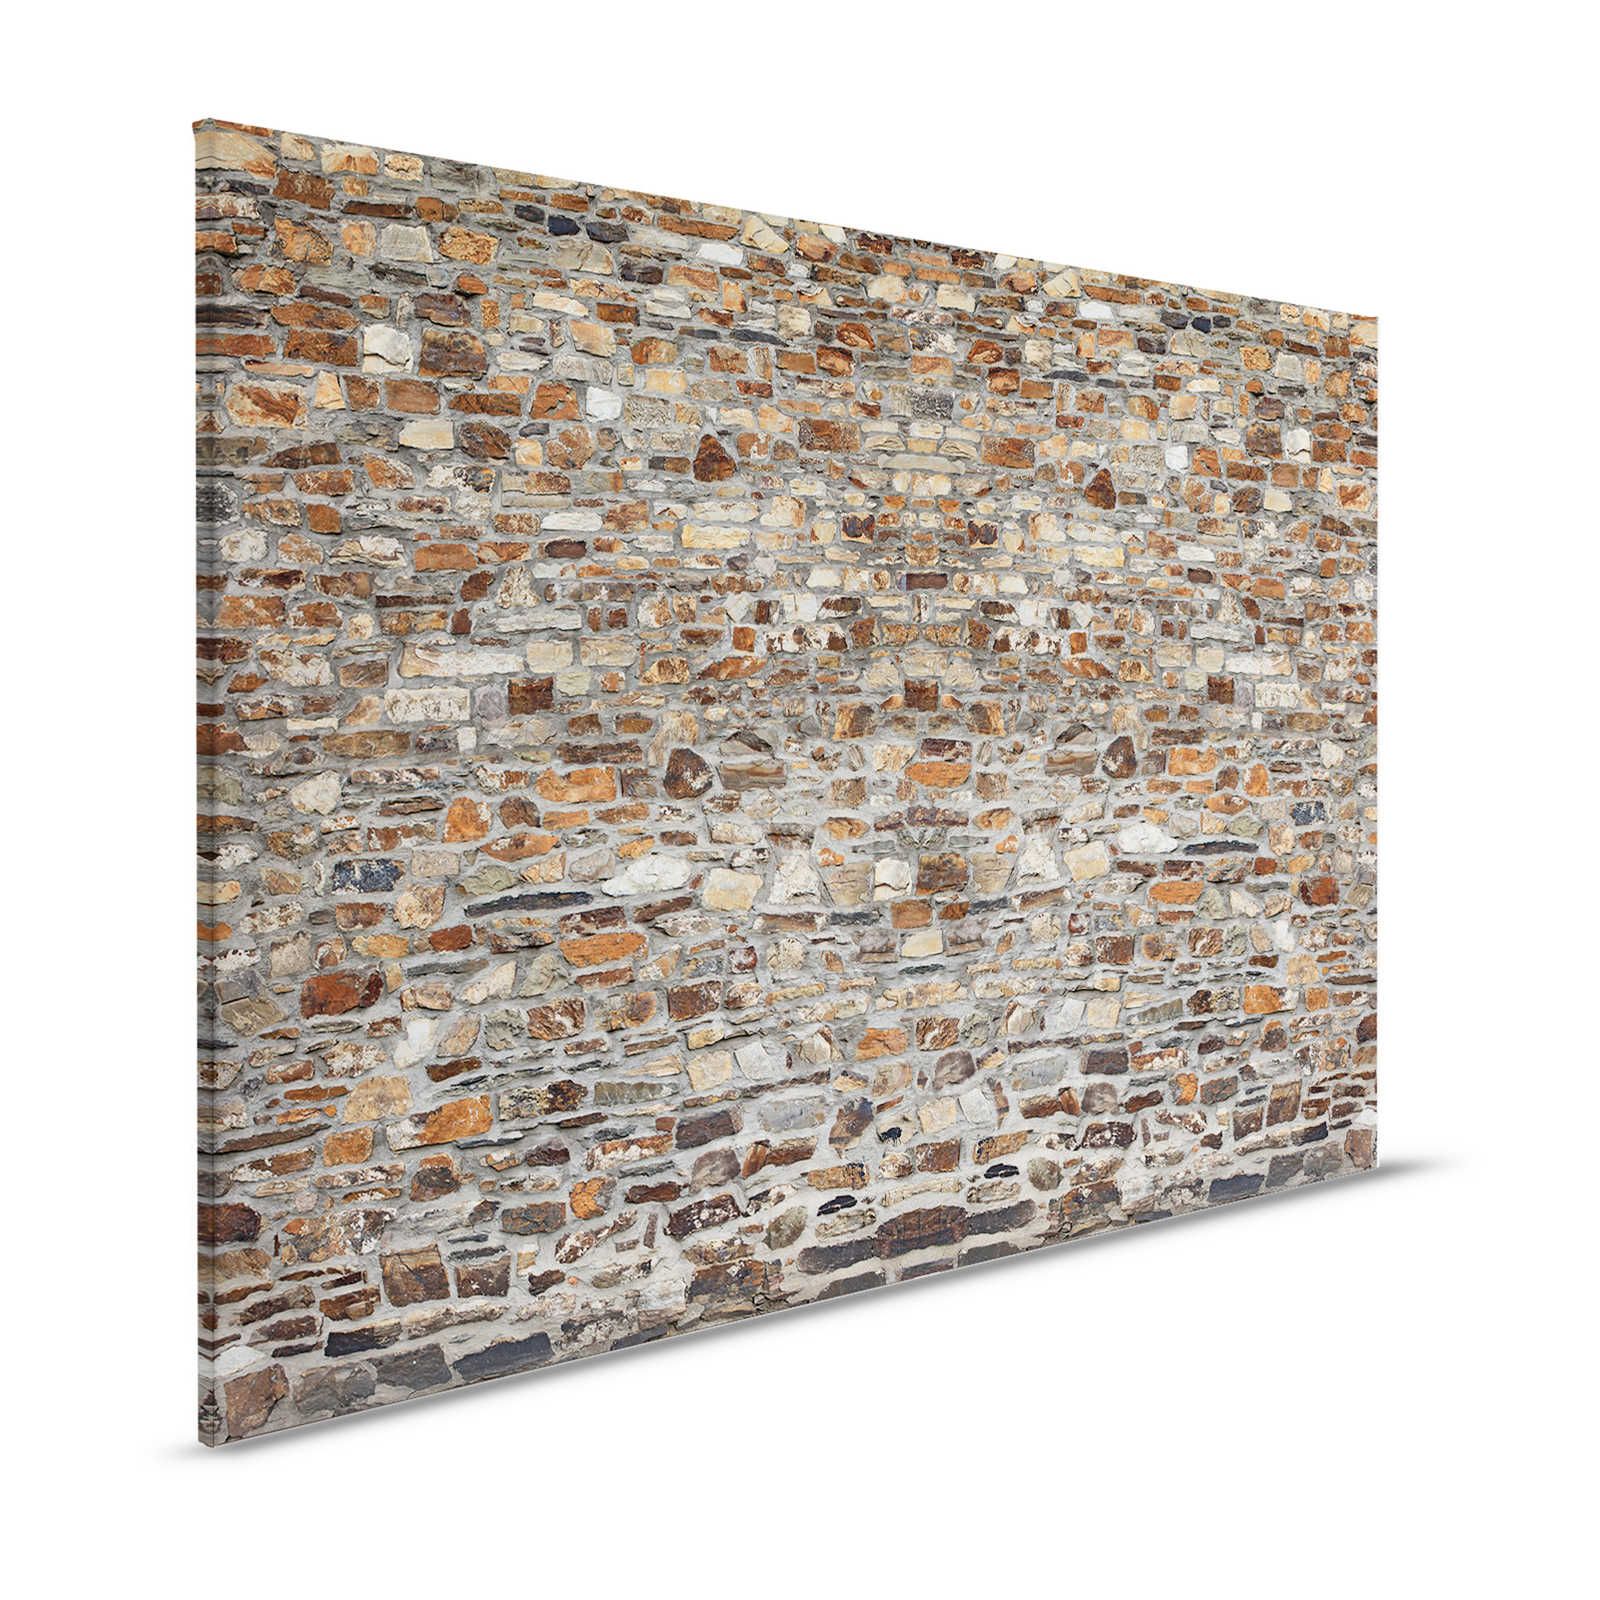 Canvas painting 3D Wall old bricks & rustic stone look - 1.20 m x 0.80 m
